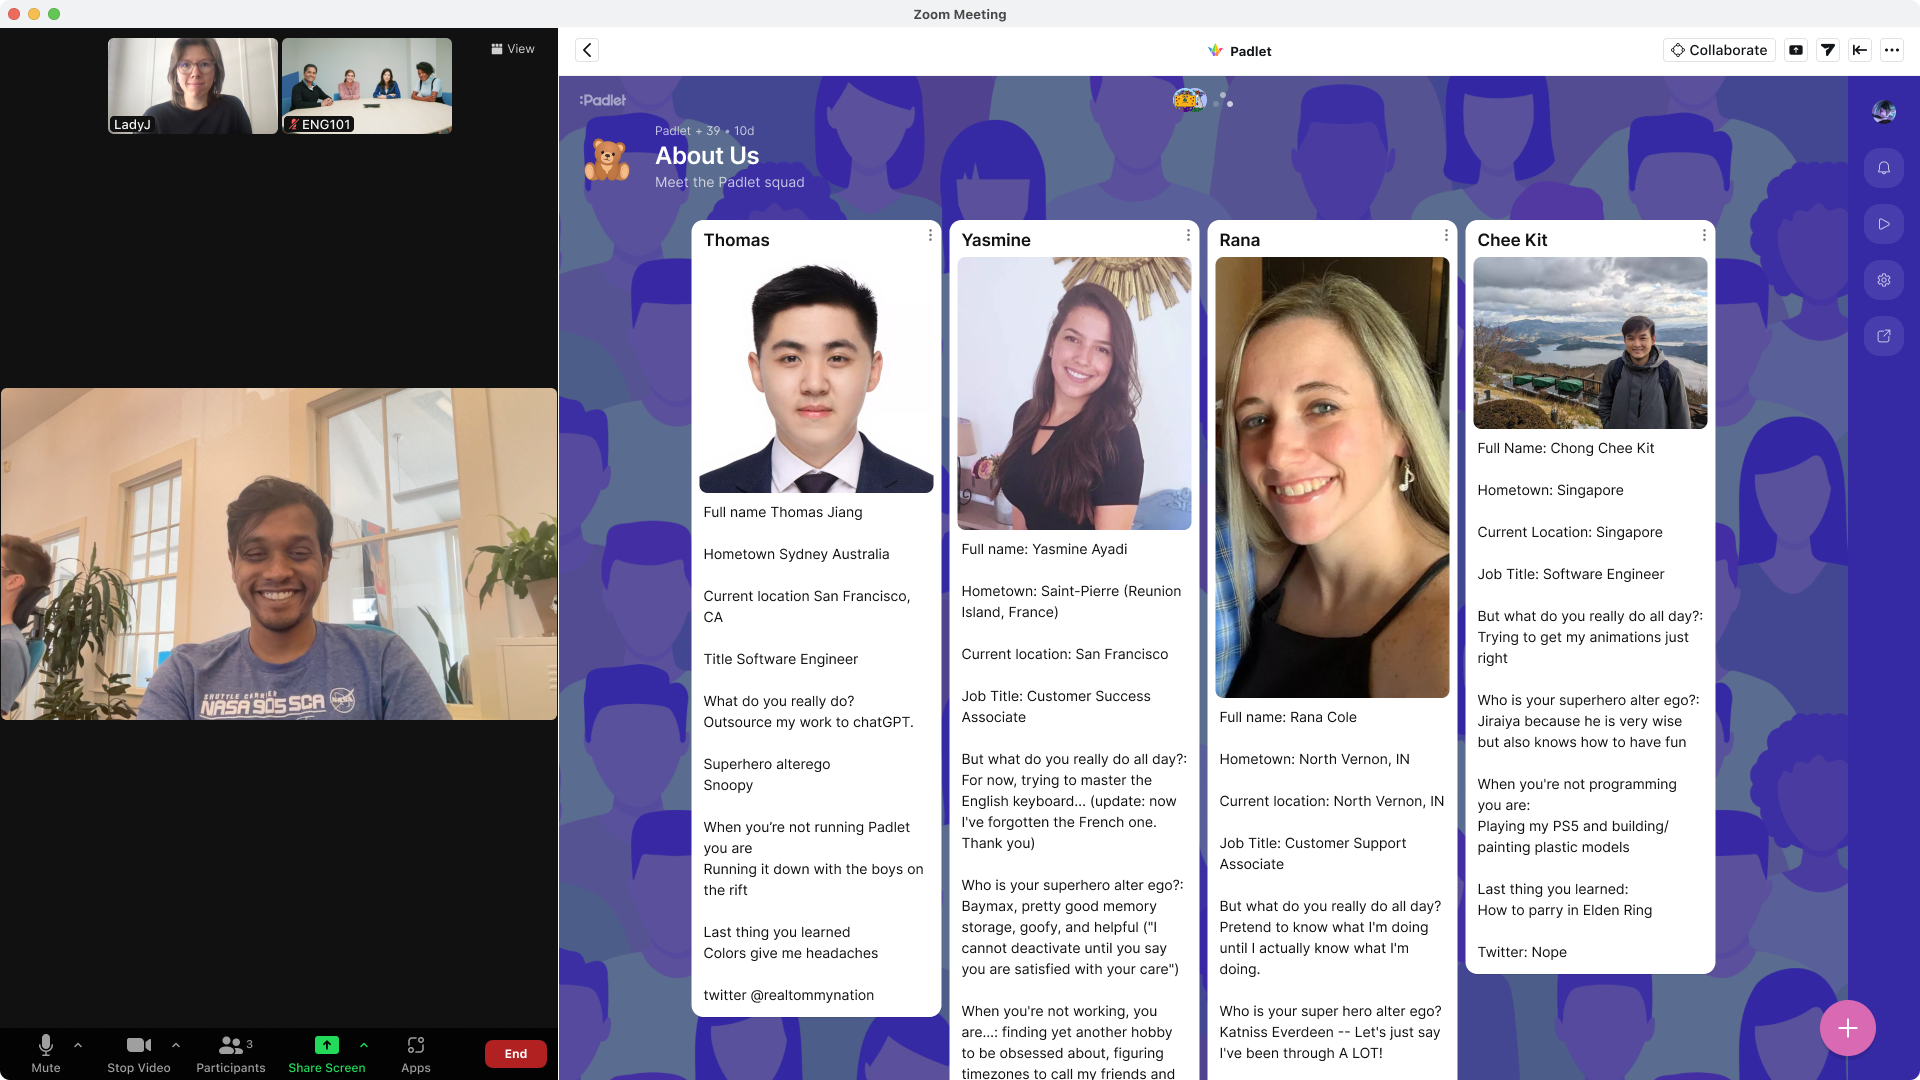 The padlet zoom app in action. A zoom meeting screen alongside a padlet with a purple wallpaper.